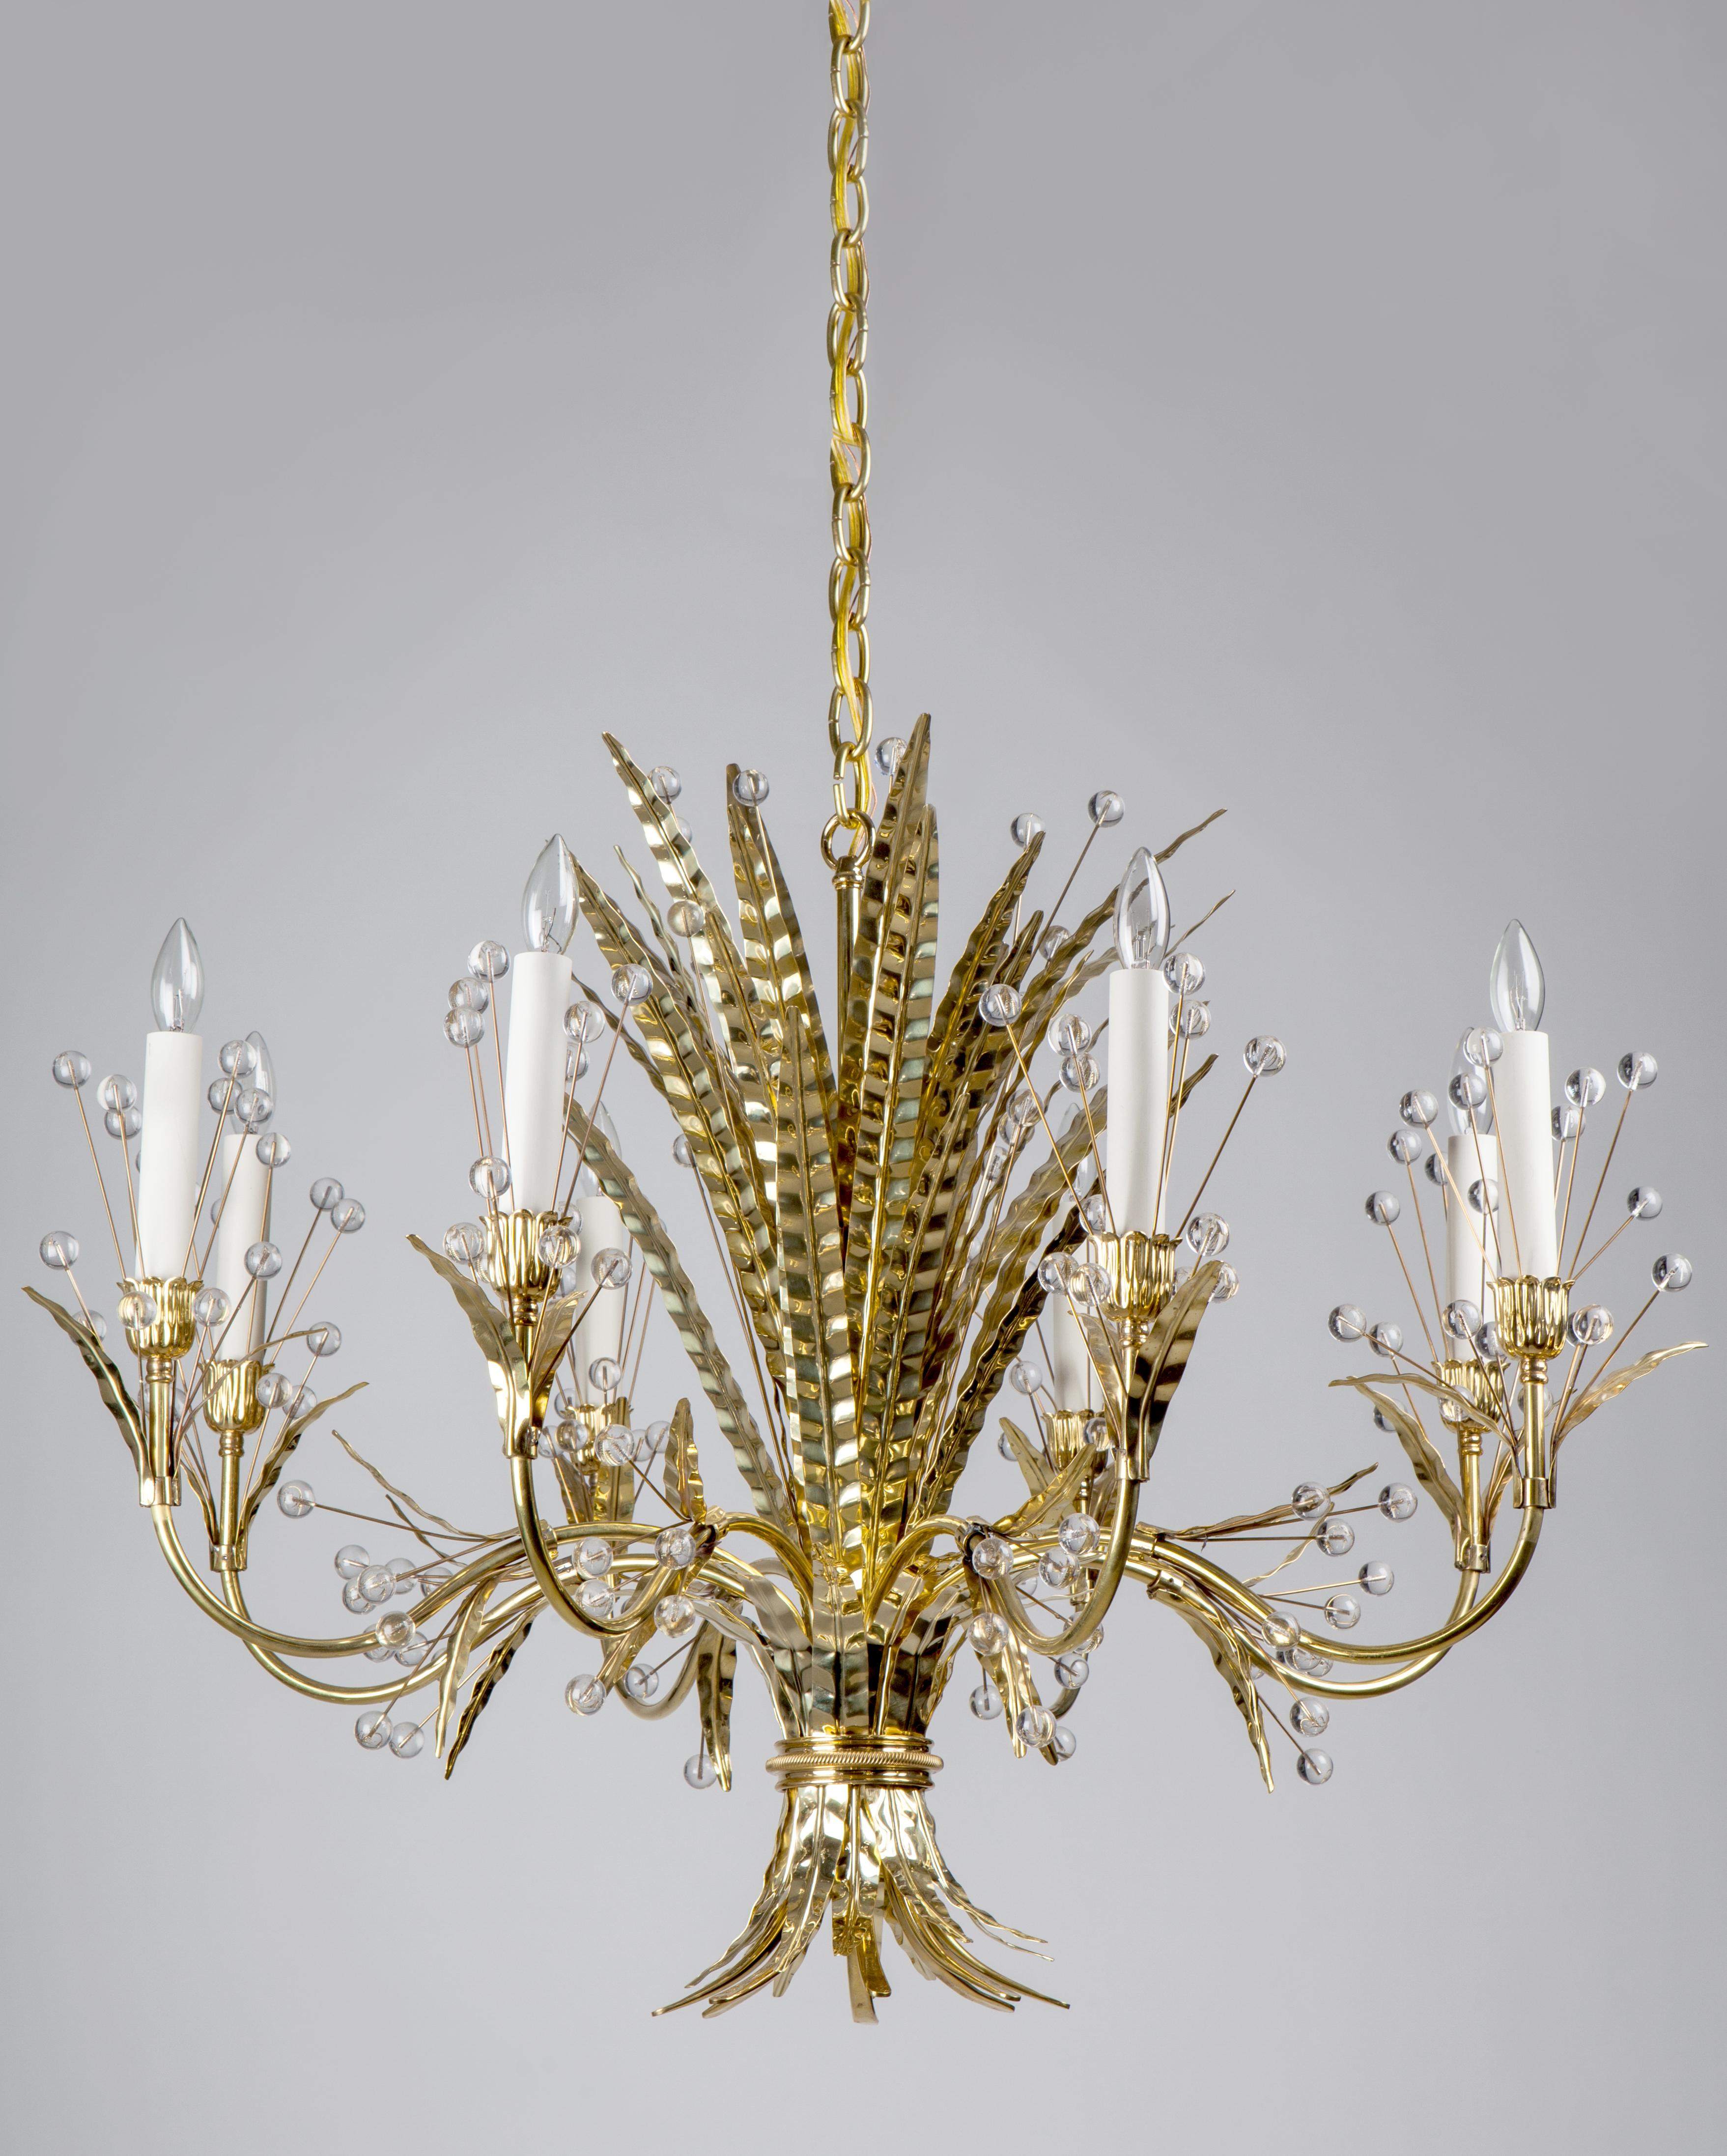 The bouquet of feathers adorning the Plume chandelier call to mind the Rue de la Faisanderie in the 16th arrondissement of Paris, where a pheasant house once stood on the grounds of the Chateau de la Muette where Tony Duquette decorated the home of